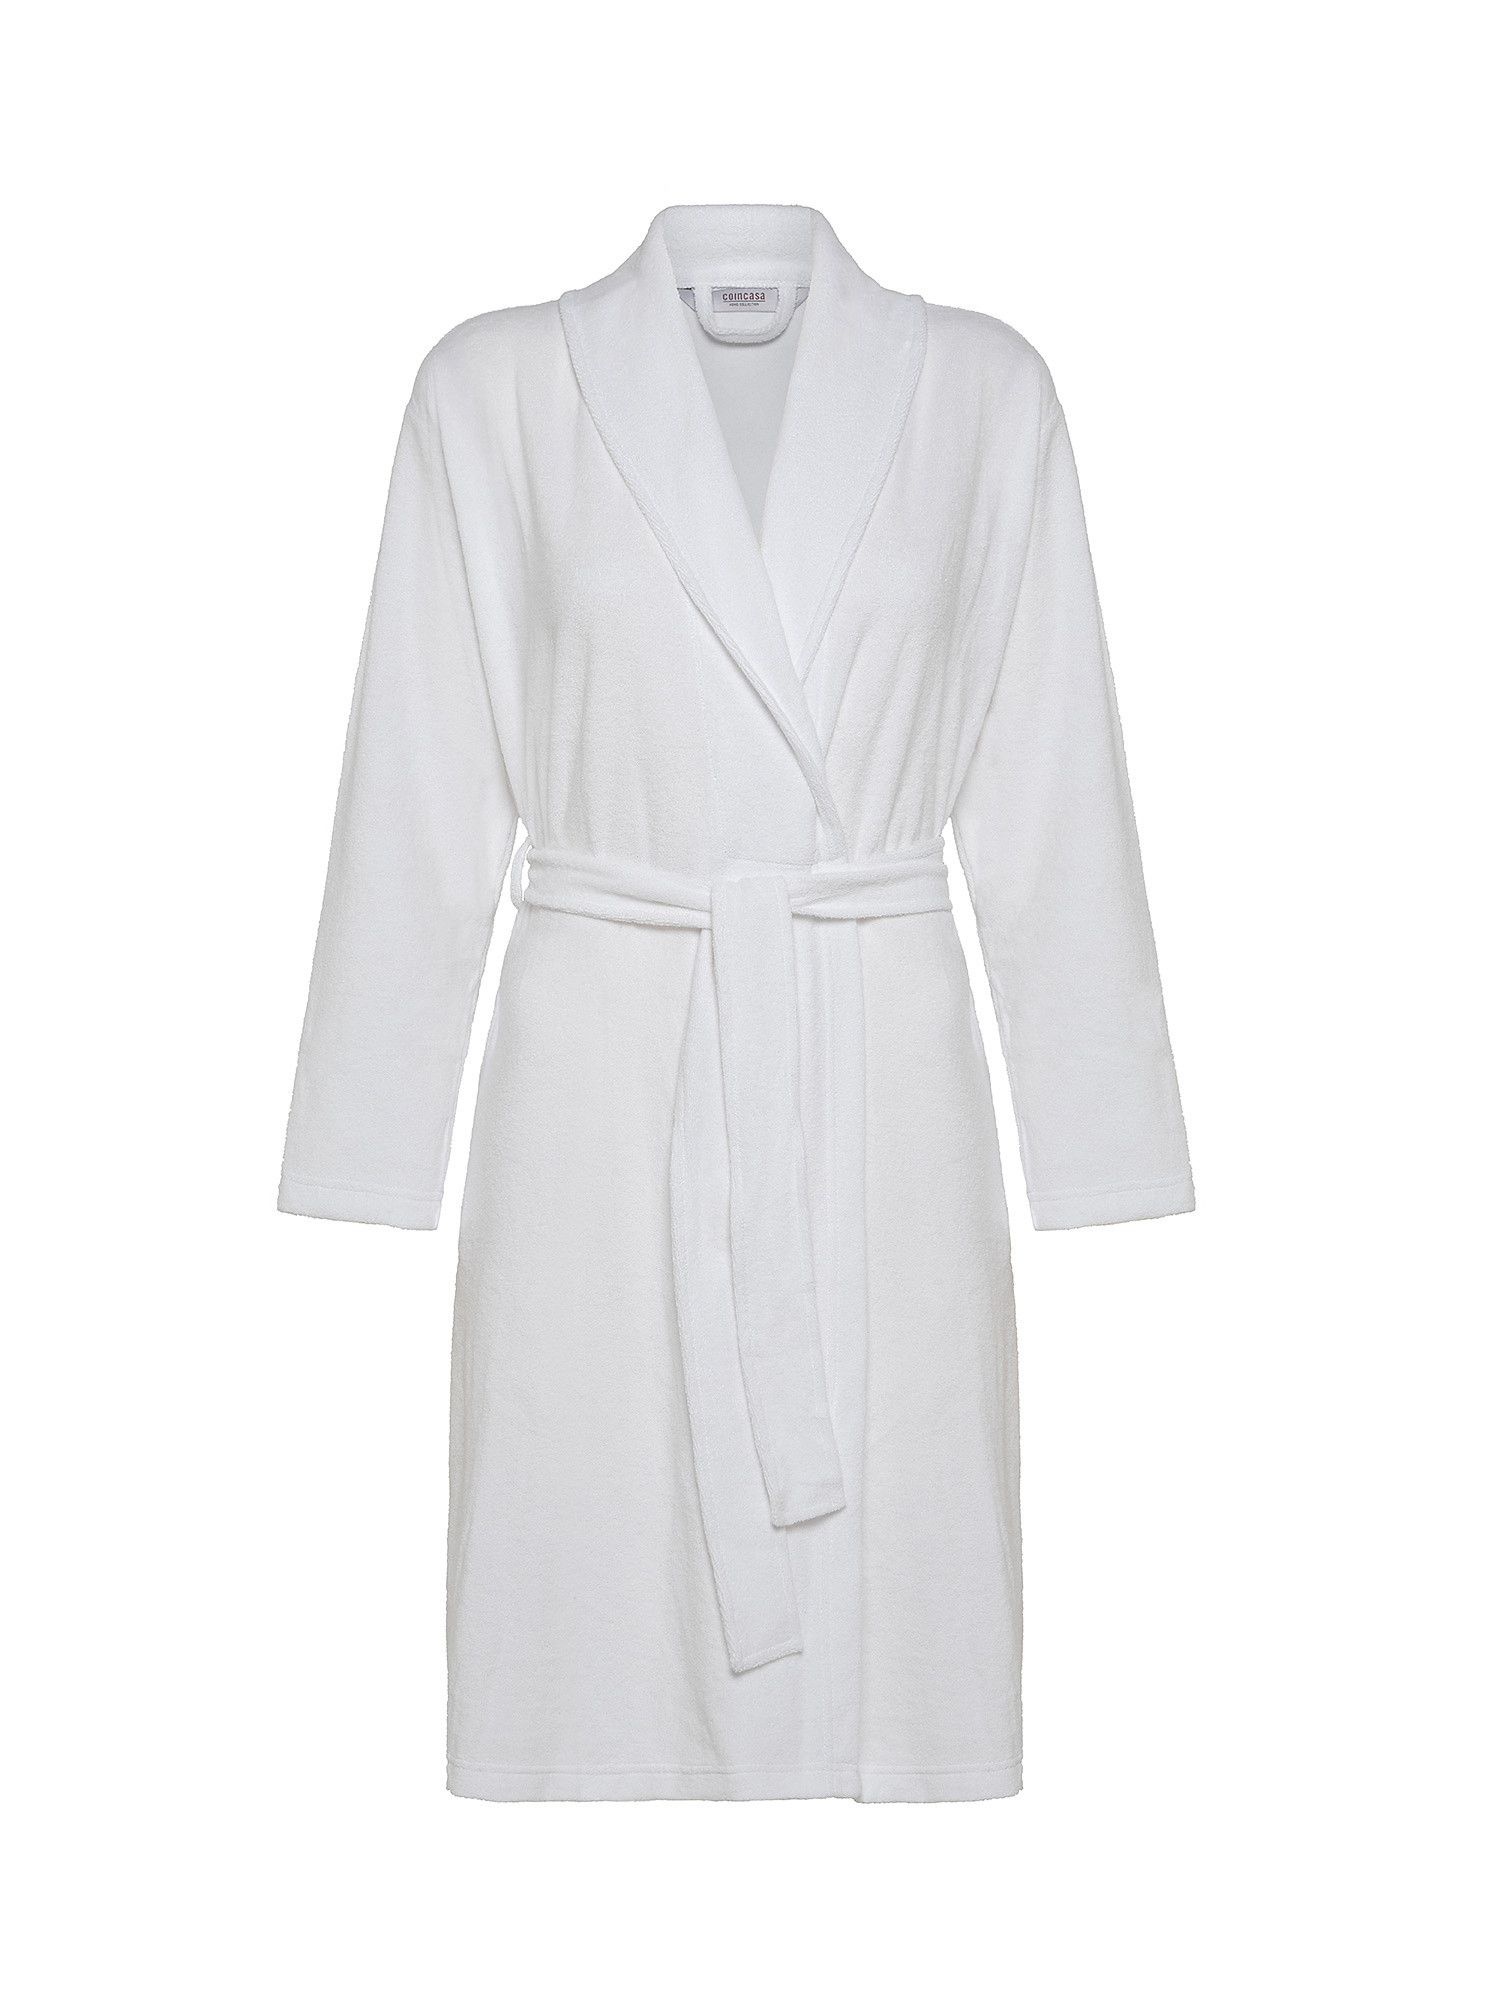 Short bathrobe in solid color micro terry, White, large image number 0